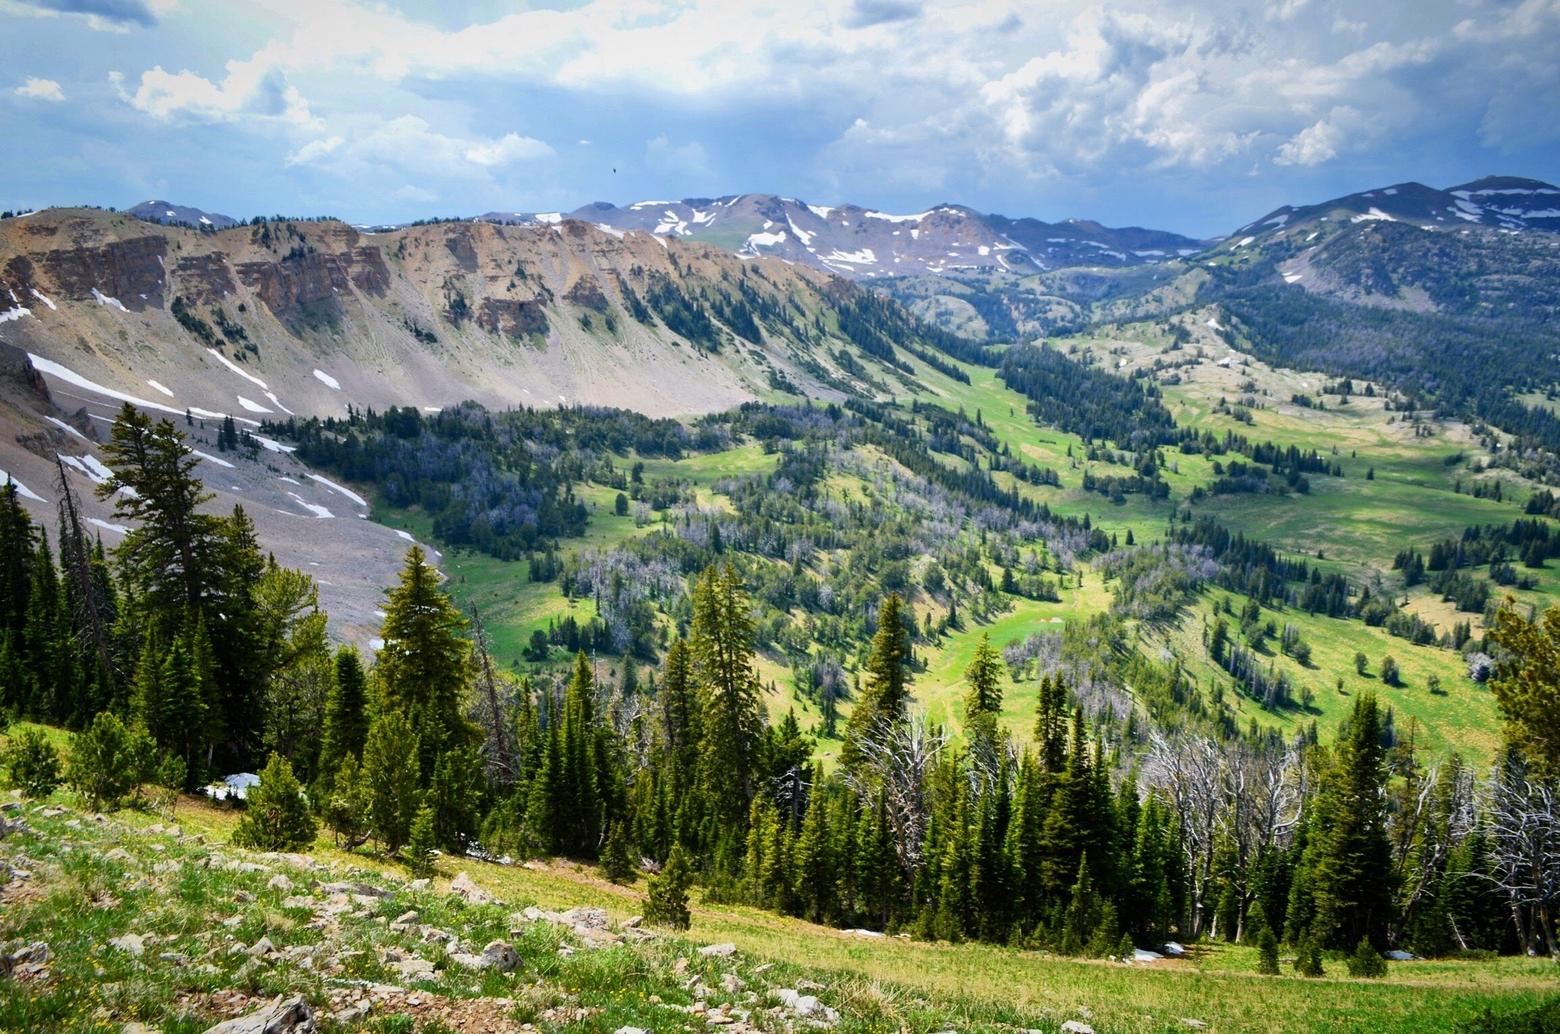 The high-alpine basins of the Henry's Lake Mountains would be one of the wildlife-rich landscapes included in the proposed Madison-Gallatin National Wildlife Monument.